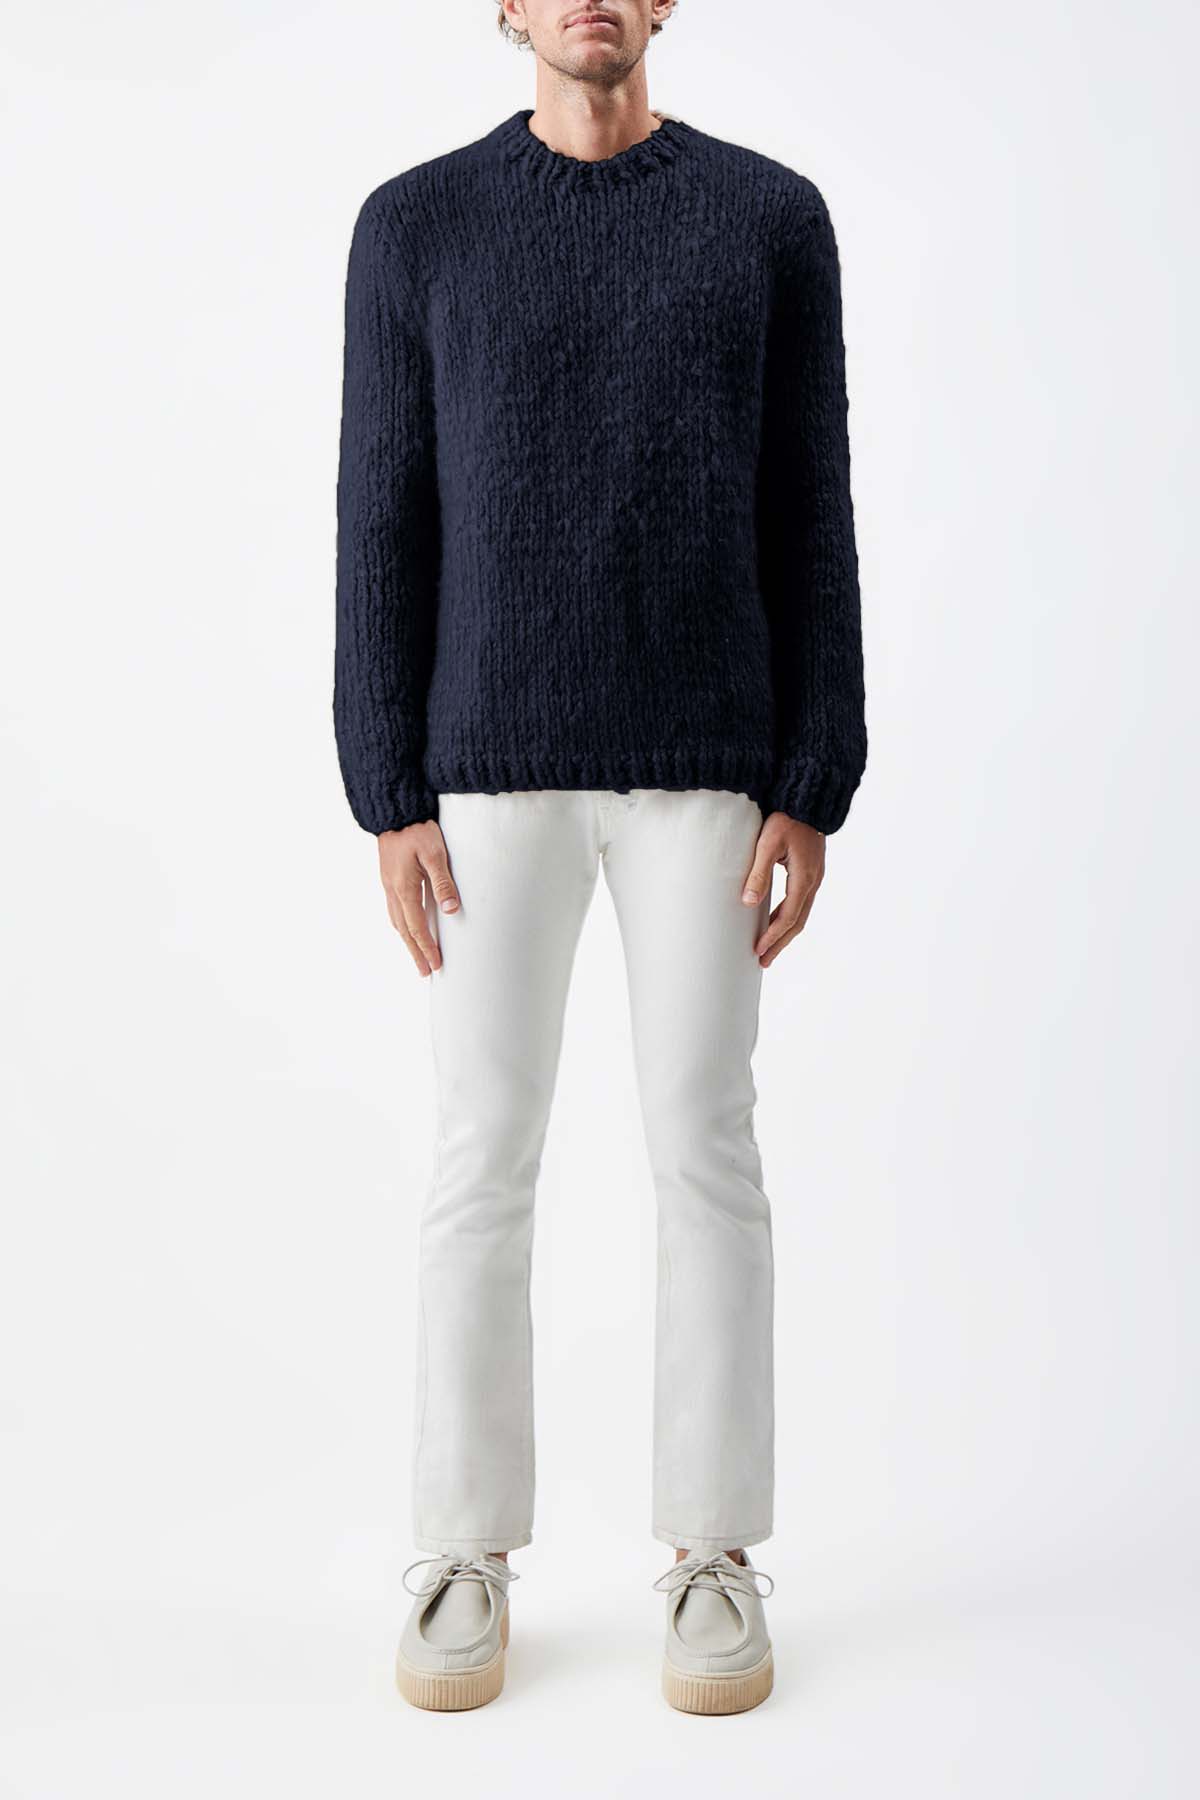 Lawrence Knit Sweater in Dark Navy Welfat Cashmere